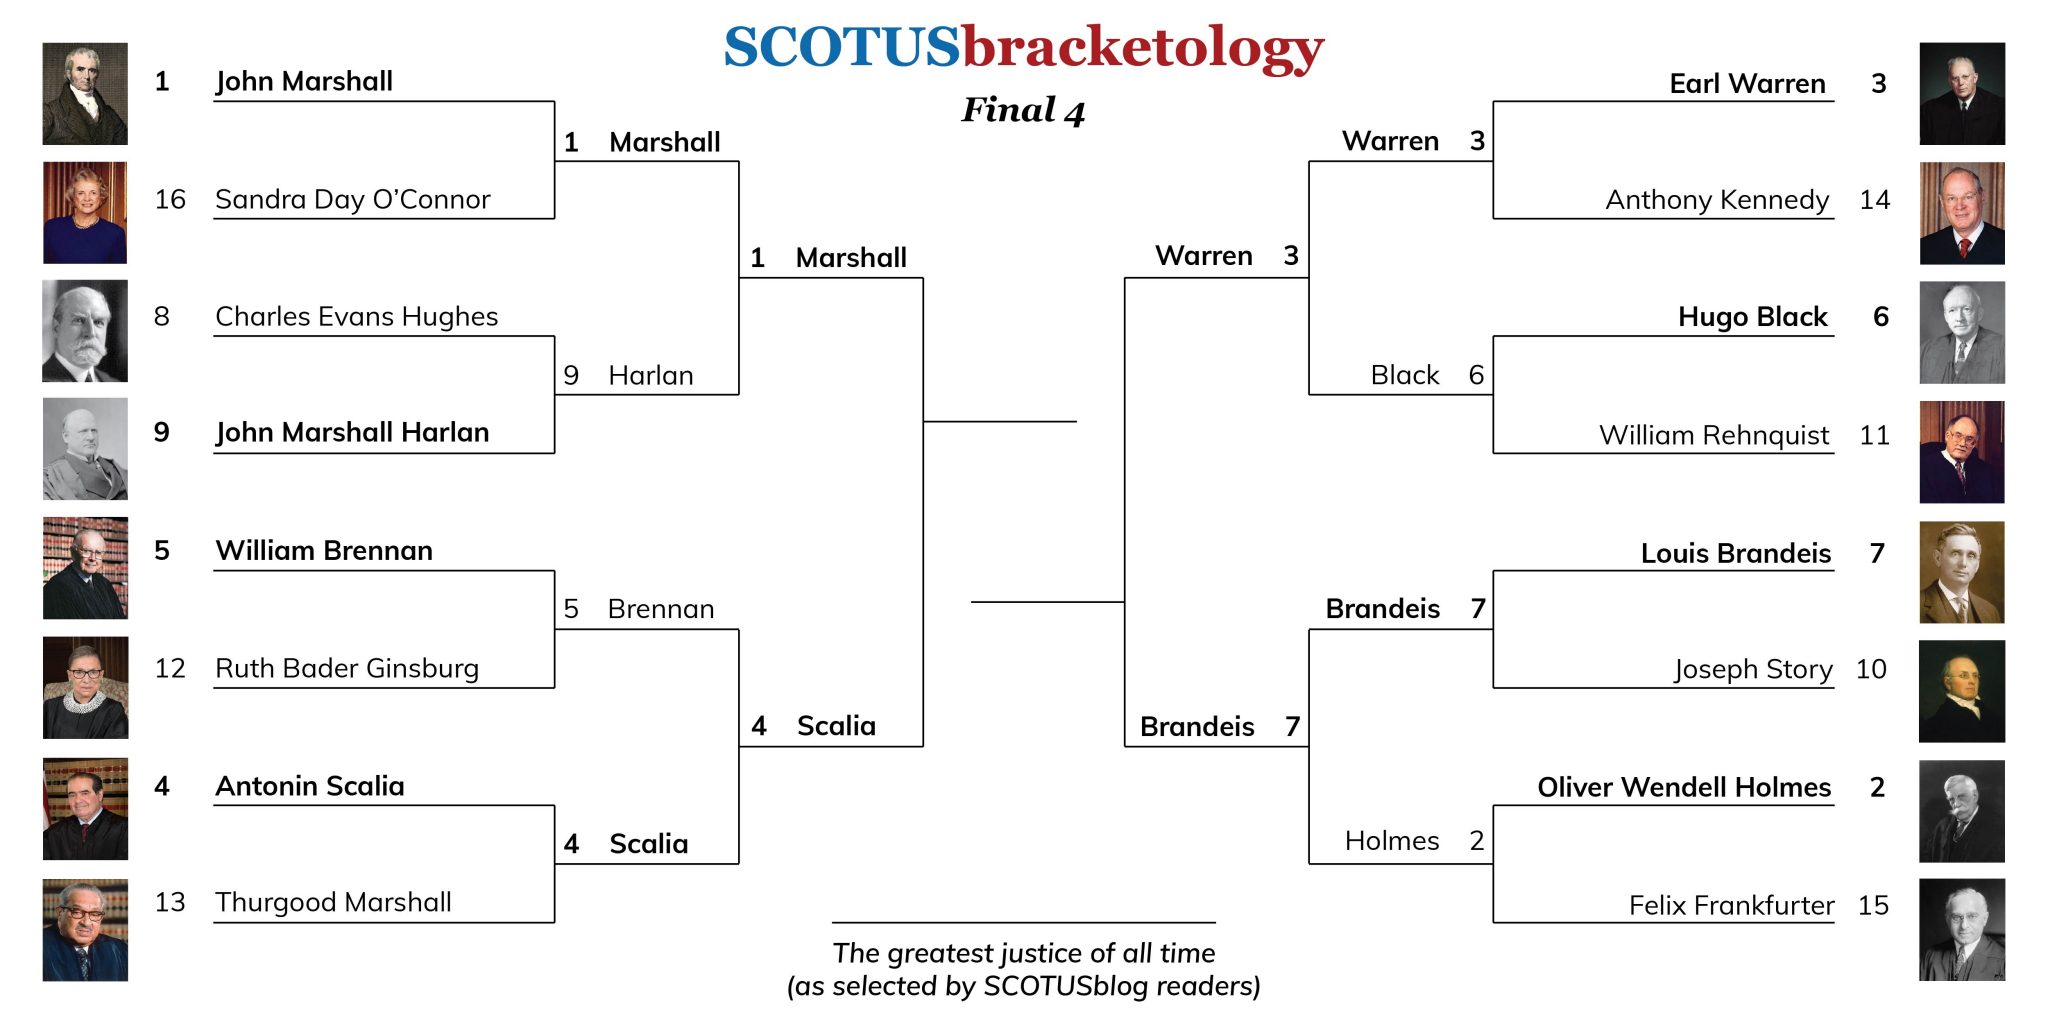 A formidable Final Four Marshall, Scalia, Warren and Brandeis vie for